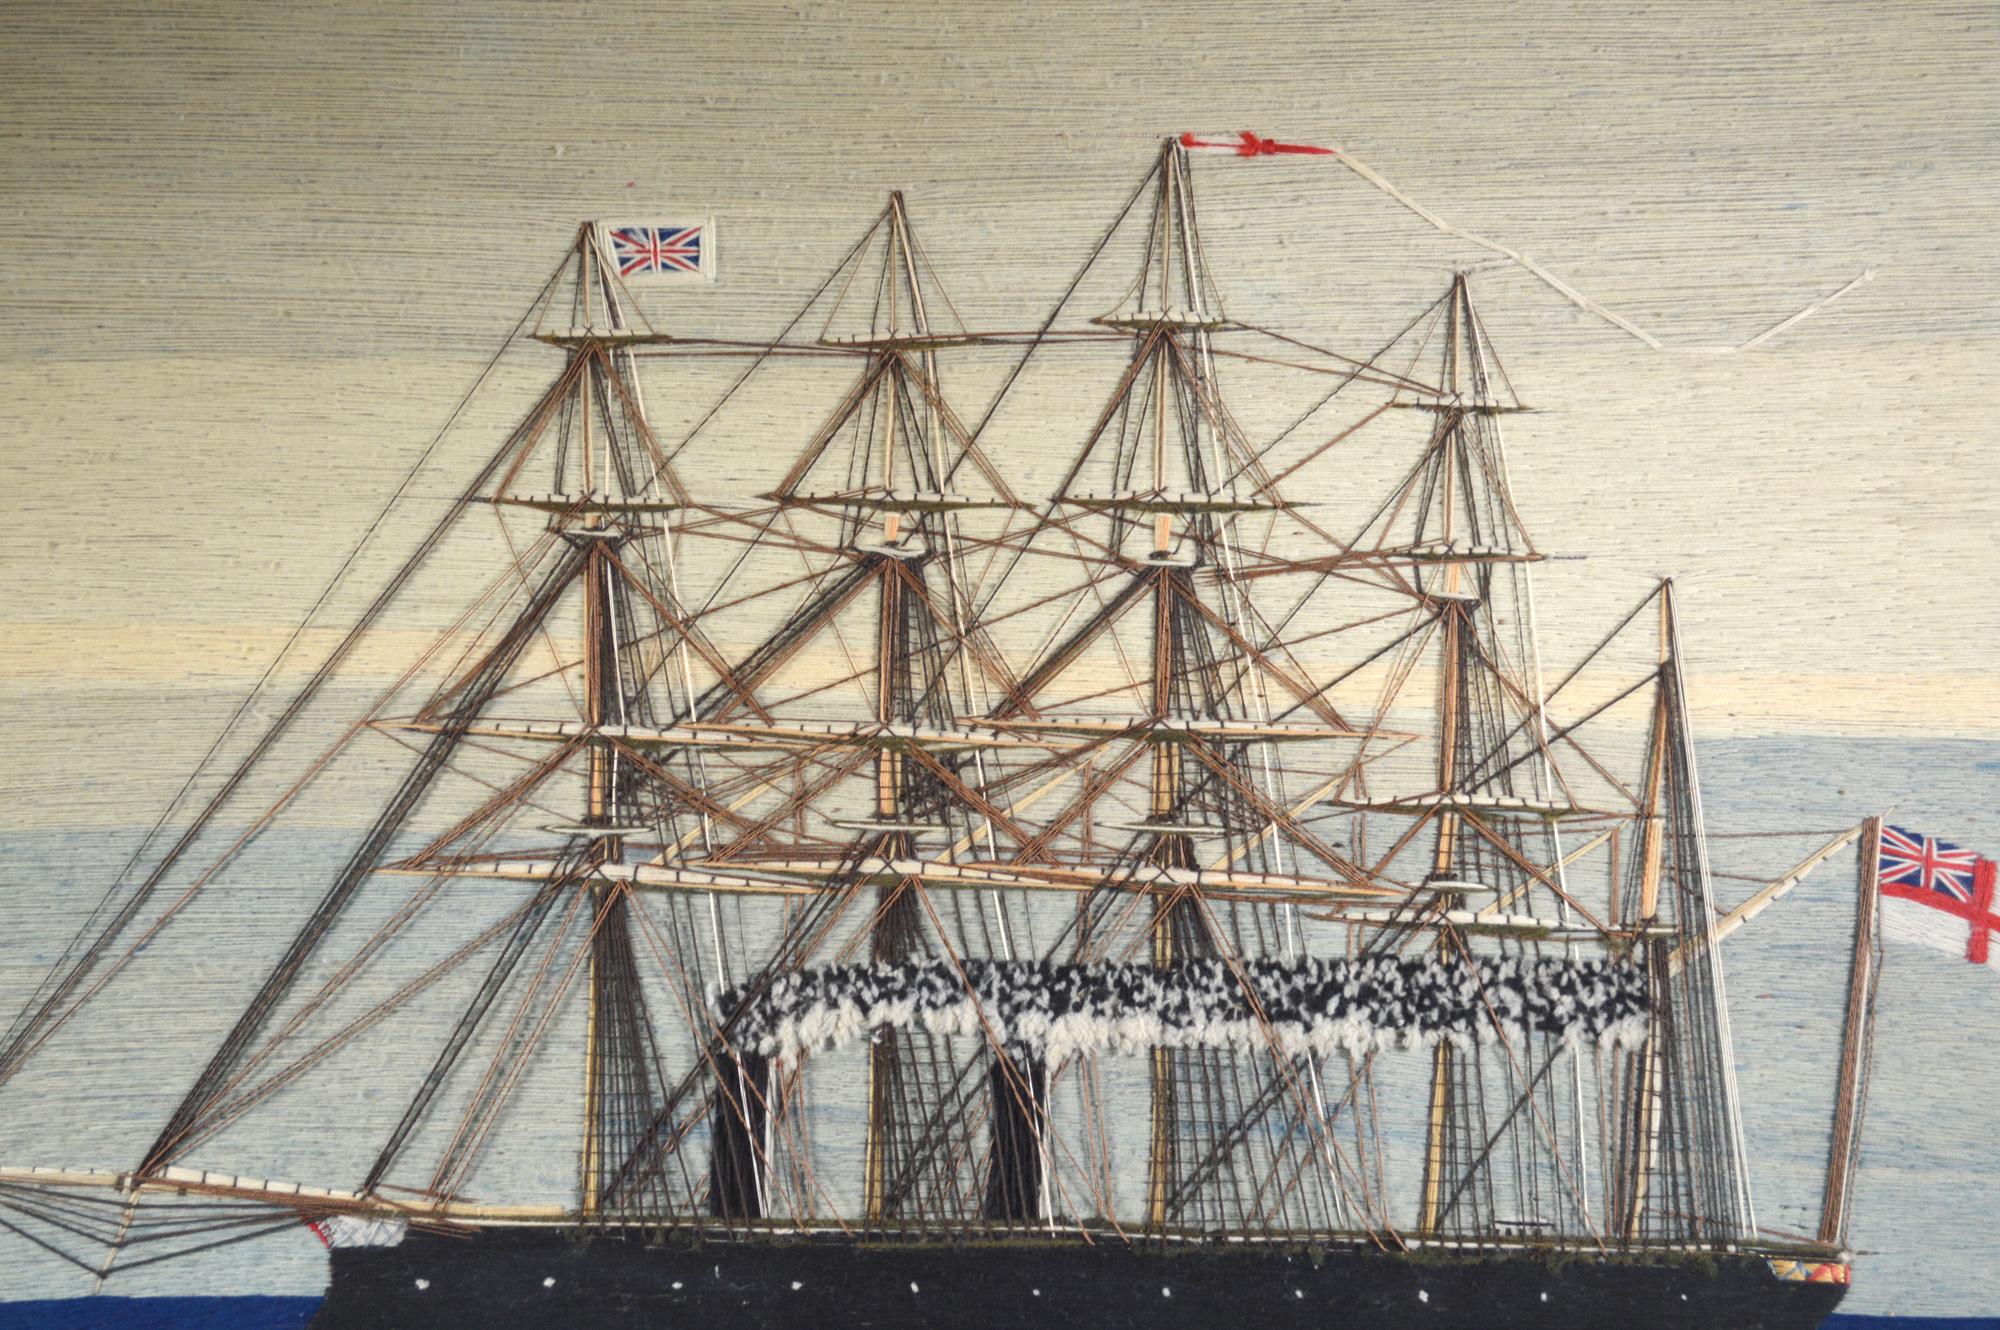 Folk Art Sailor's Woolwork of Royal Navy Five-Masted Ship under Steam, Minotaur Class For Sale